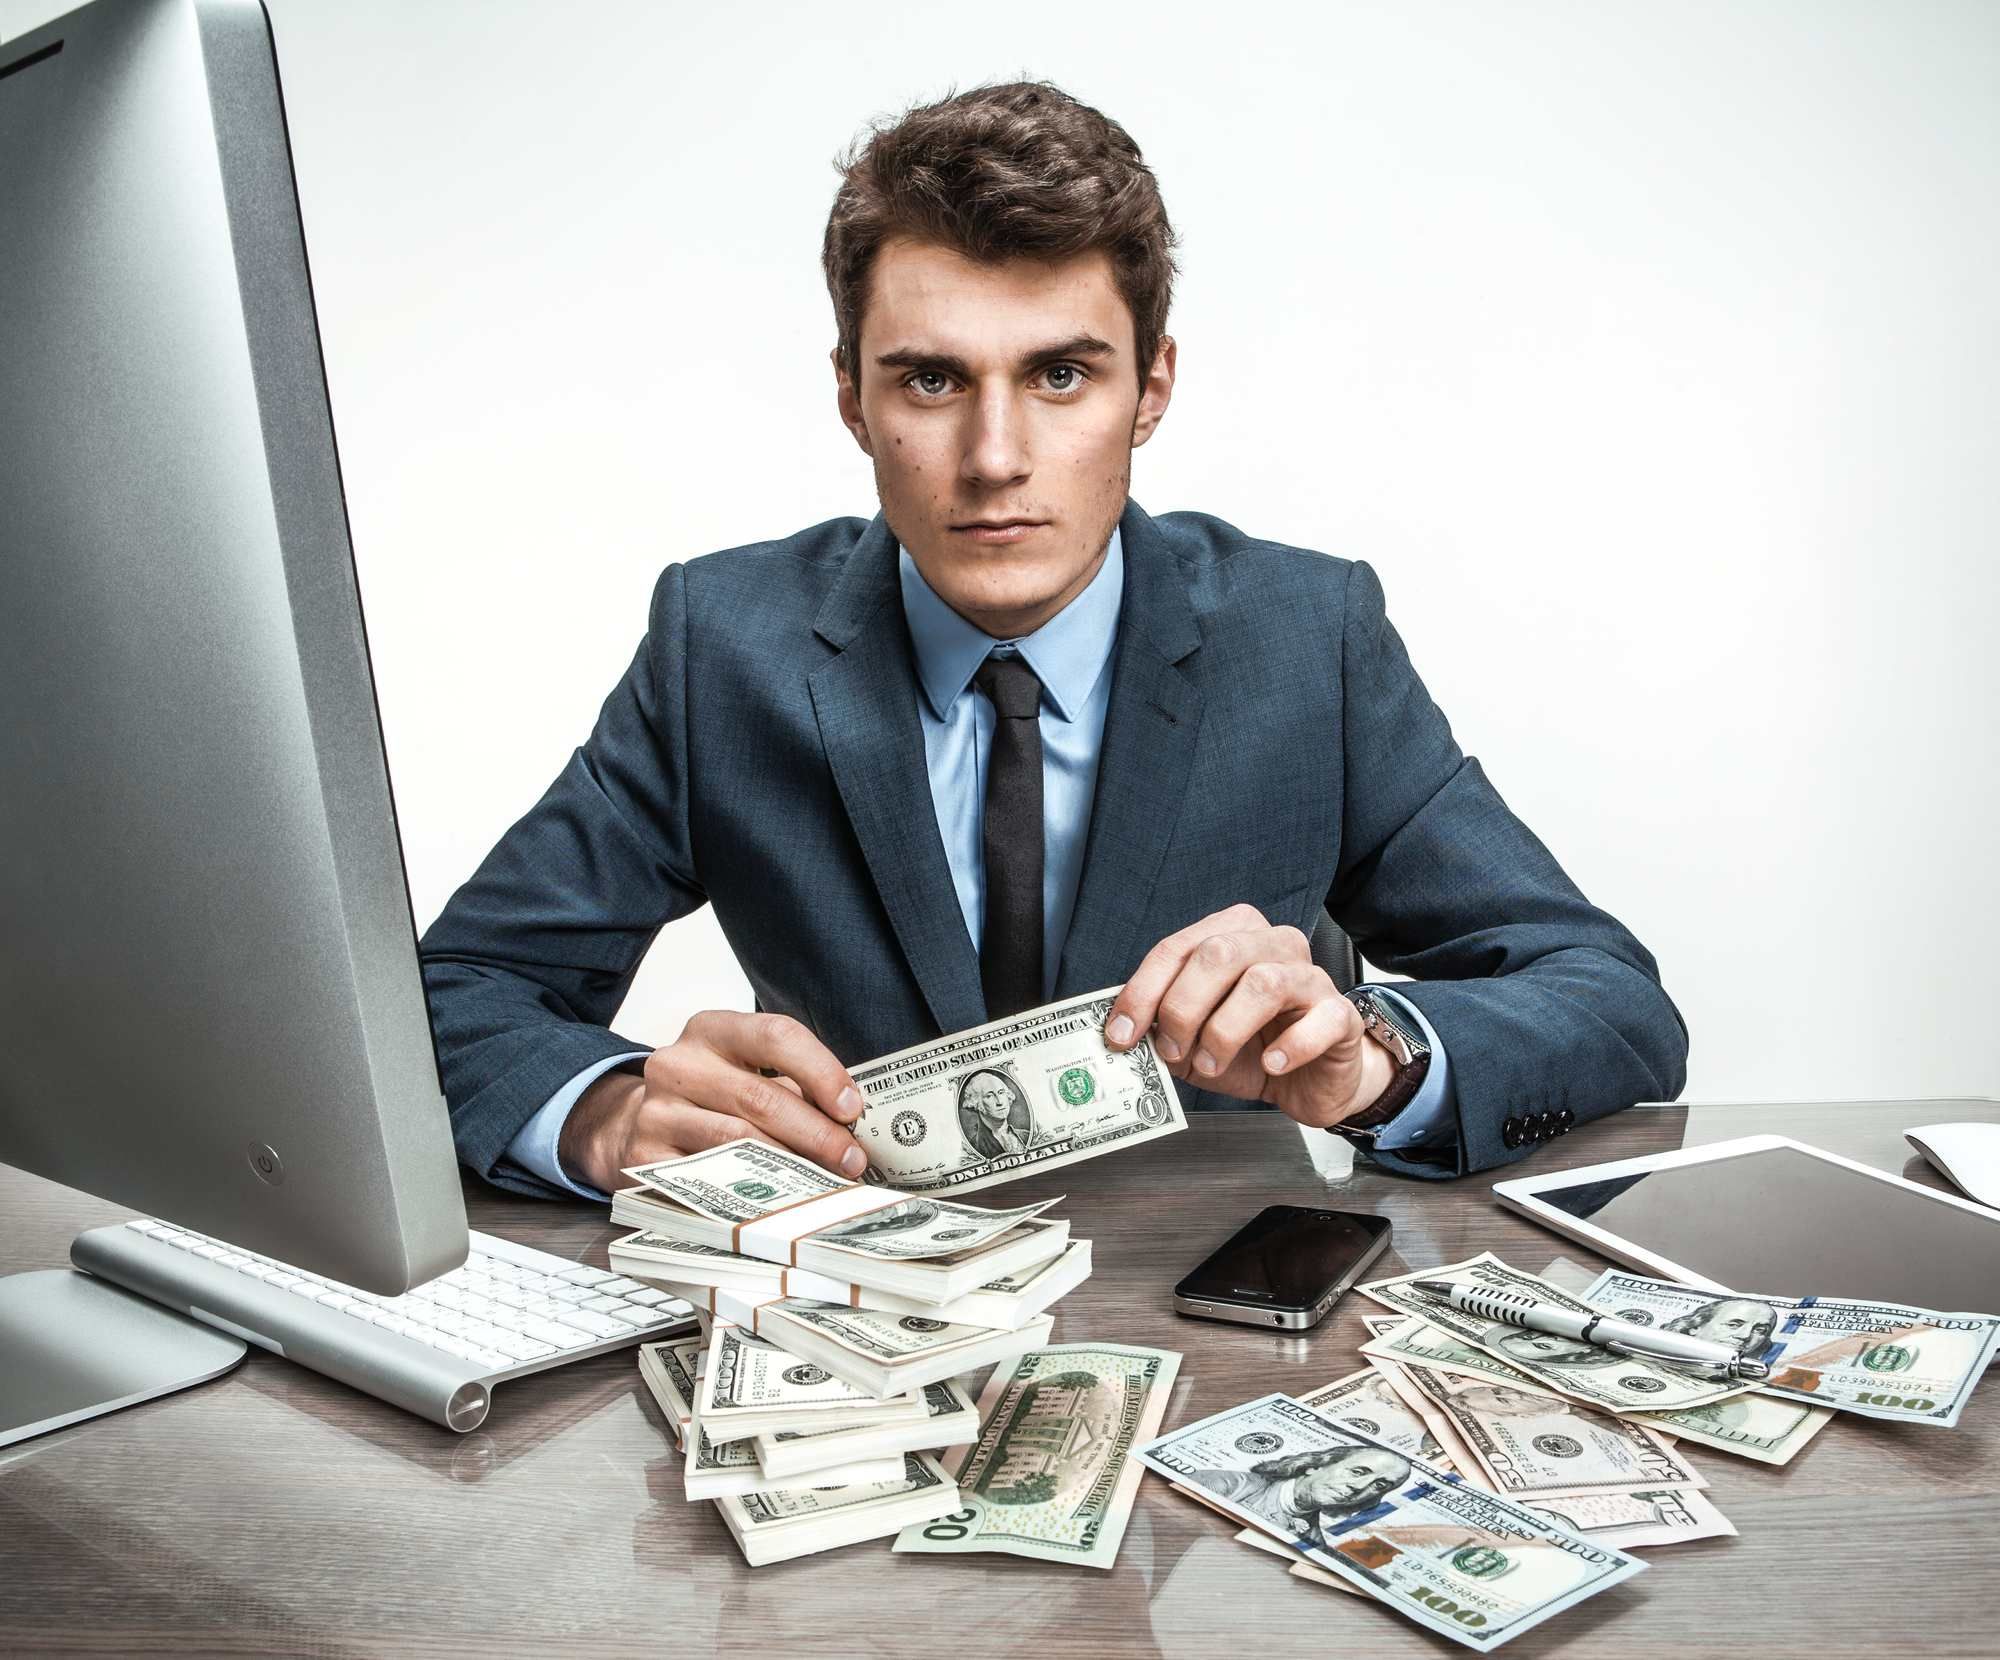 bank employee with lots of money on desk